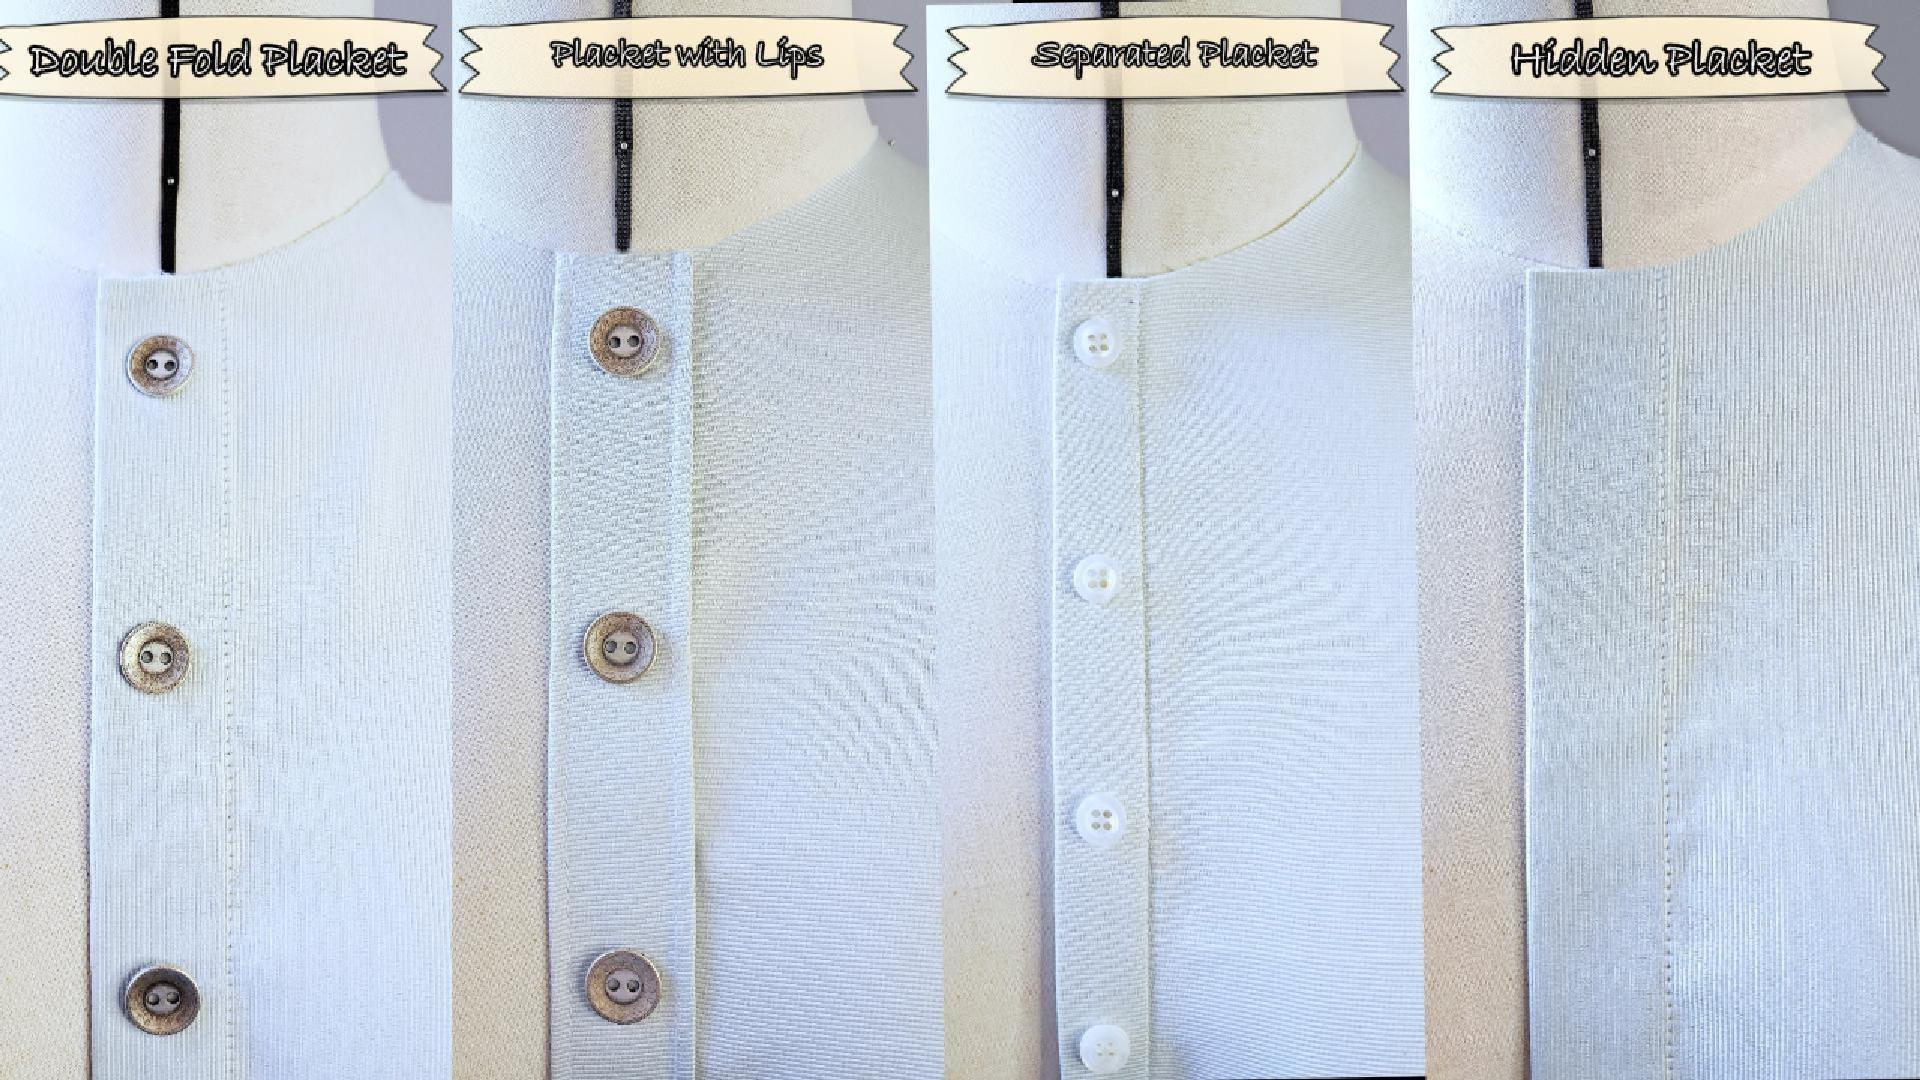 4 different placket design for your shirts